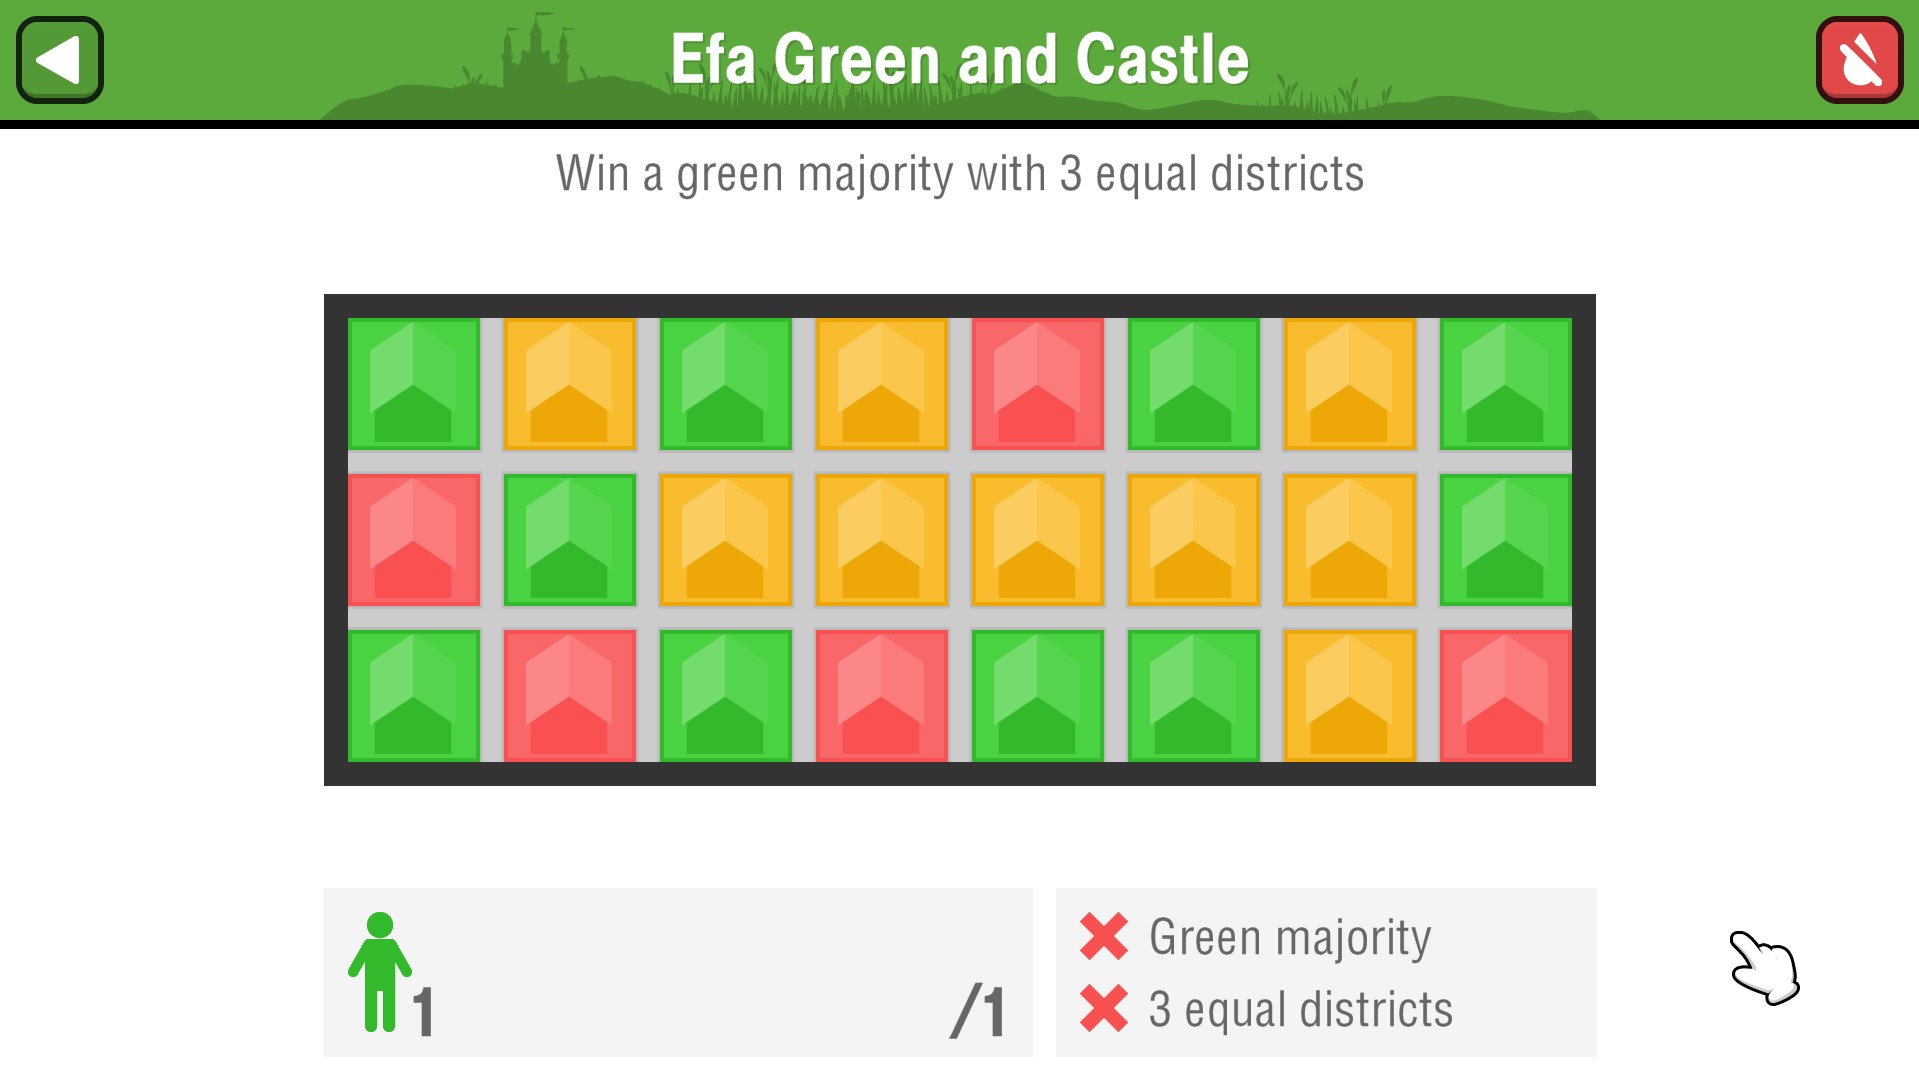 Efa Green and Castle